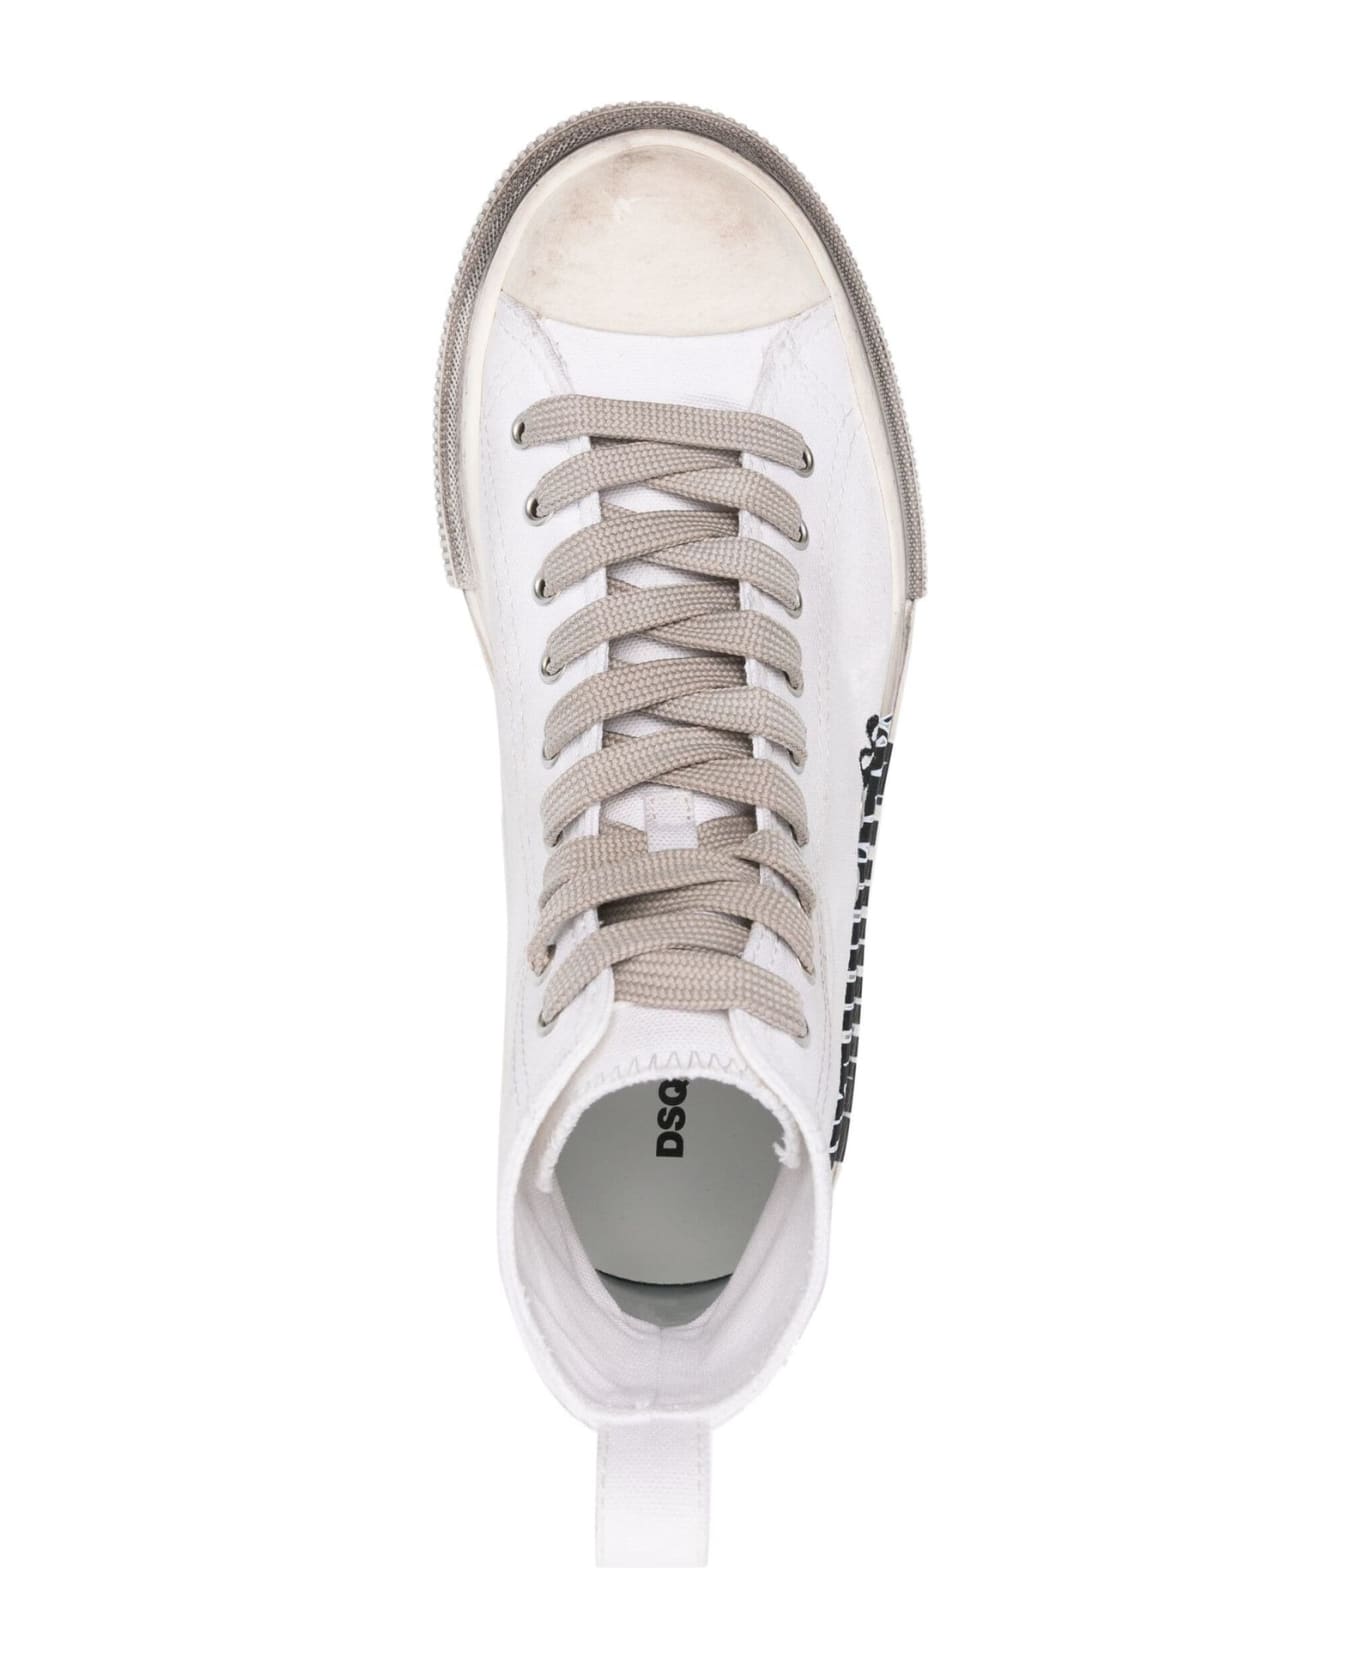 Dsquared2 Sneakers - White